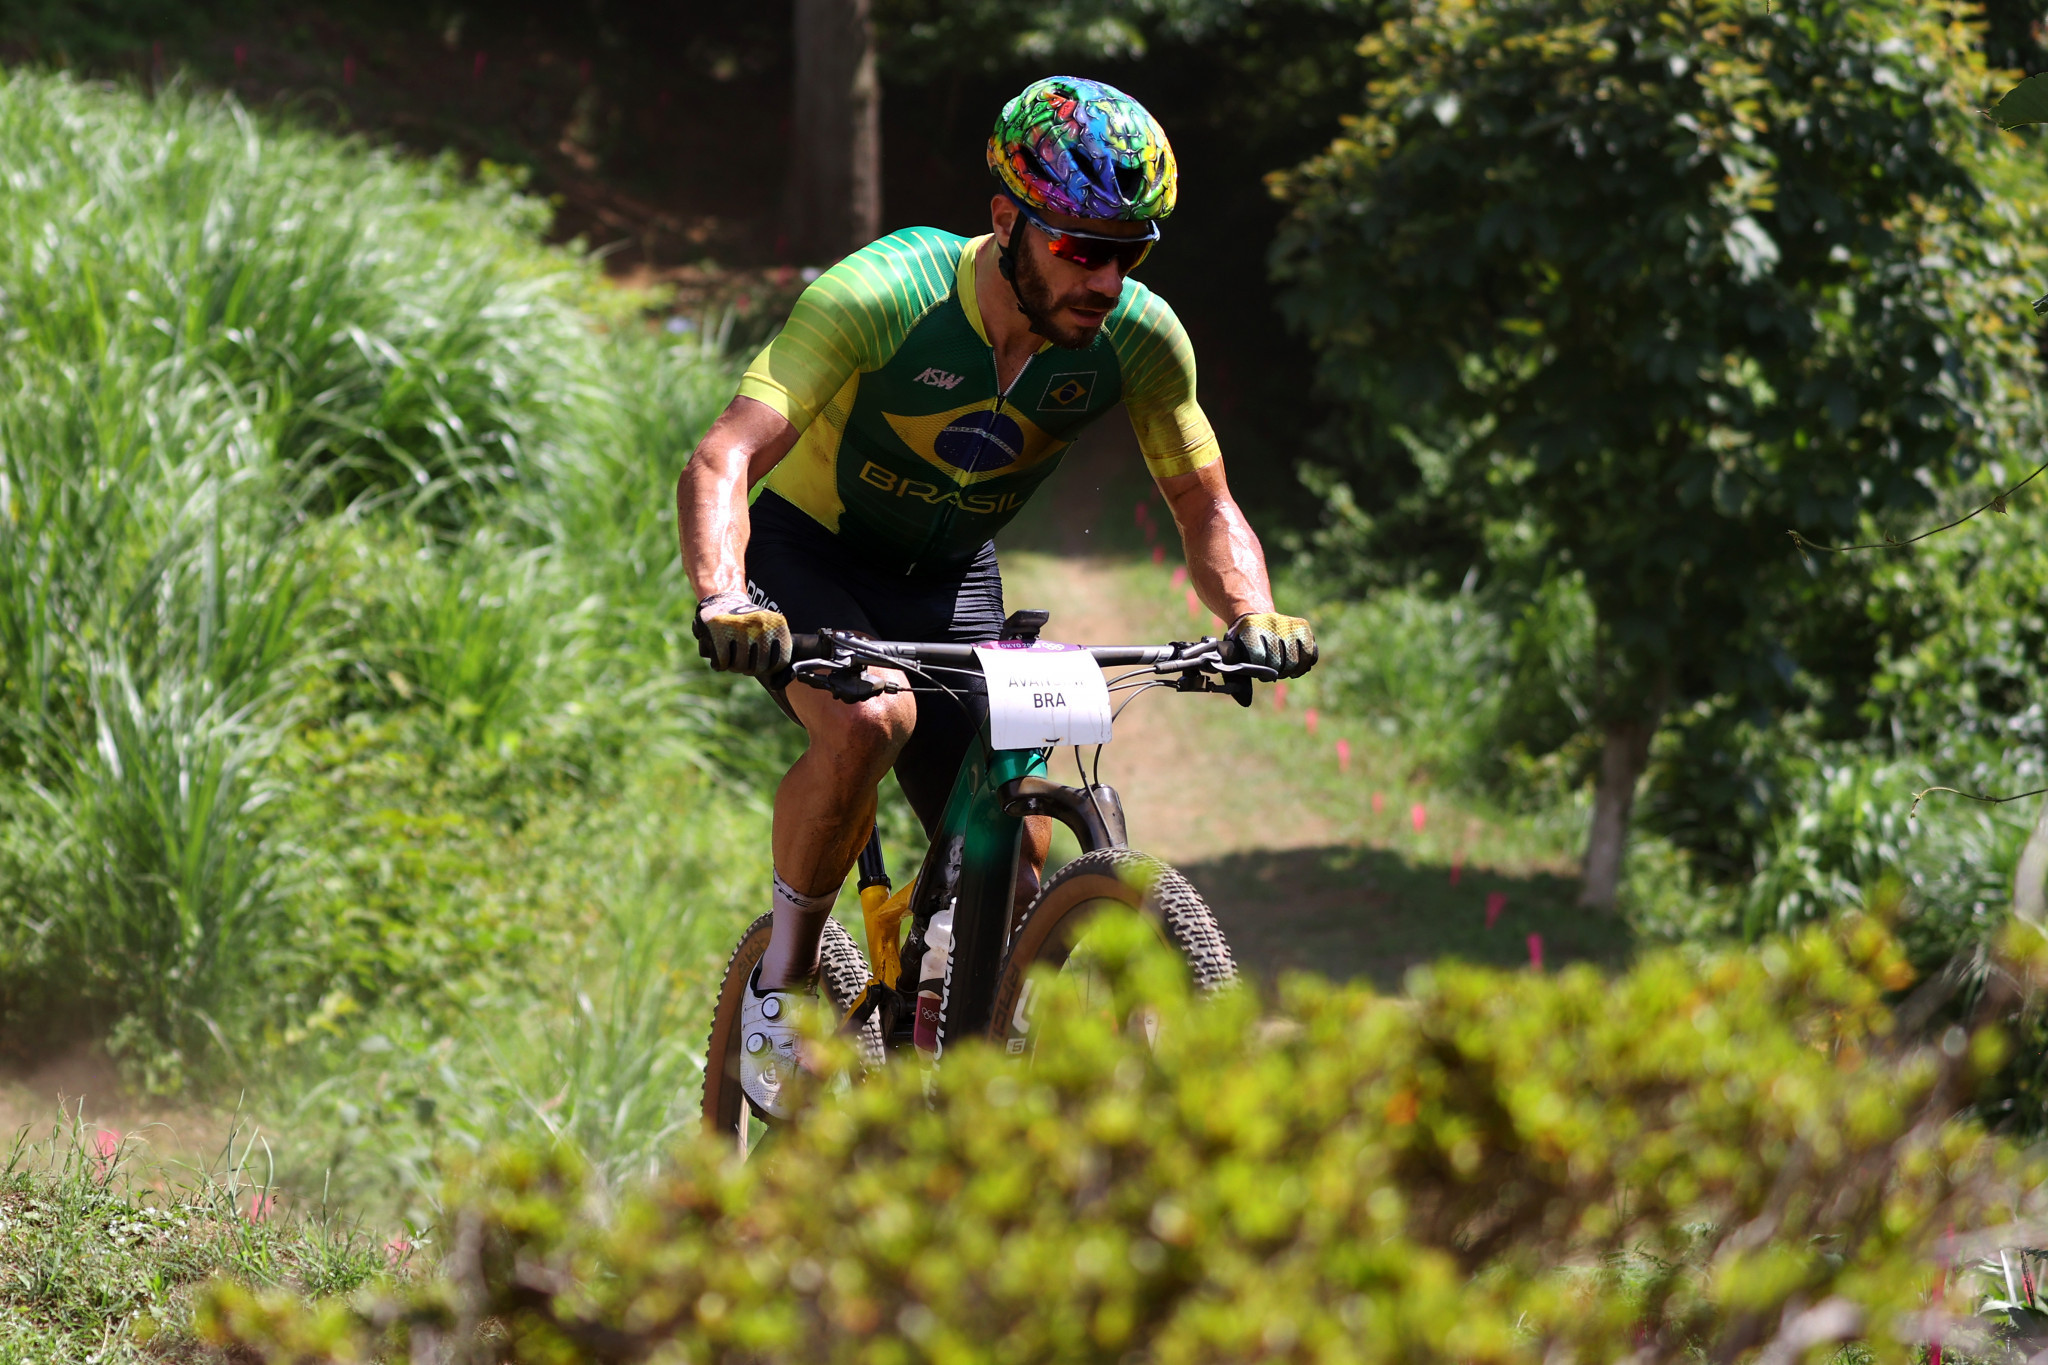 Henrique Avancini is expected to win the Petrópolis stage of the Mountain Bike World Cup ©Getty Images